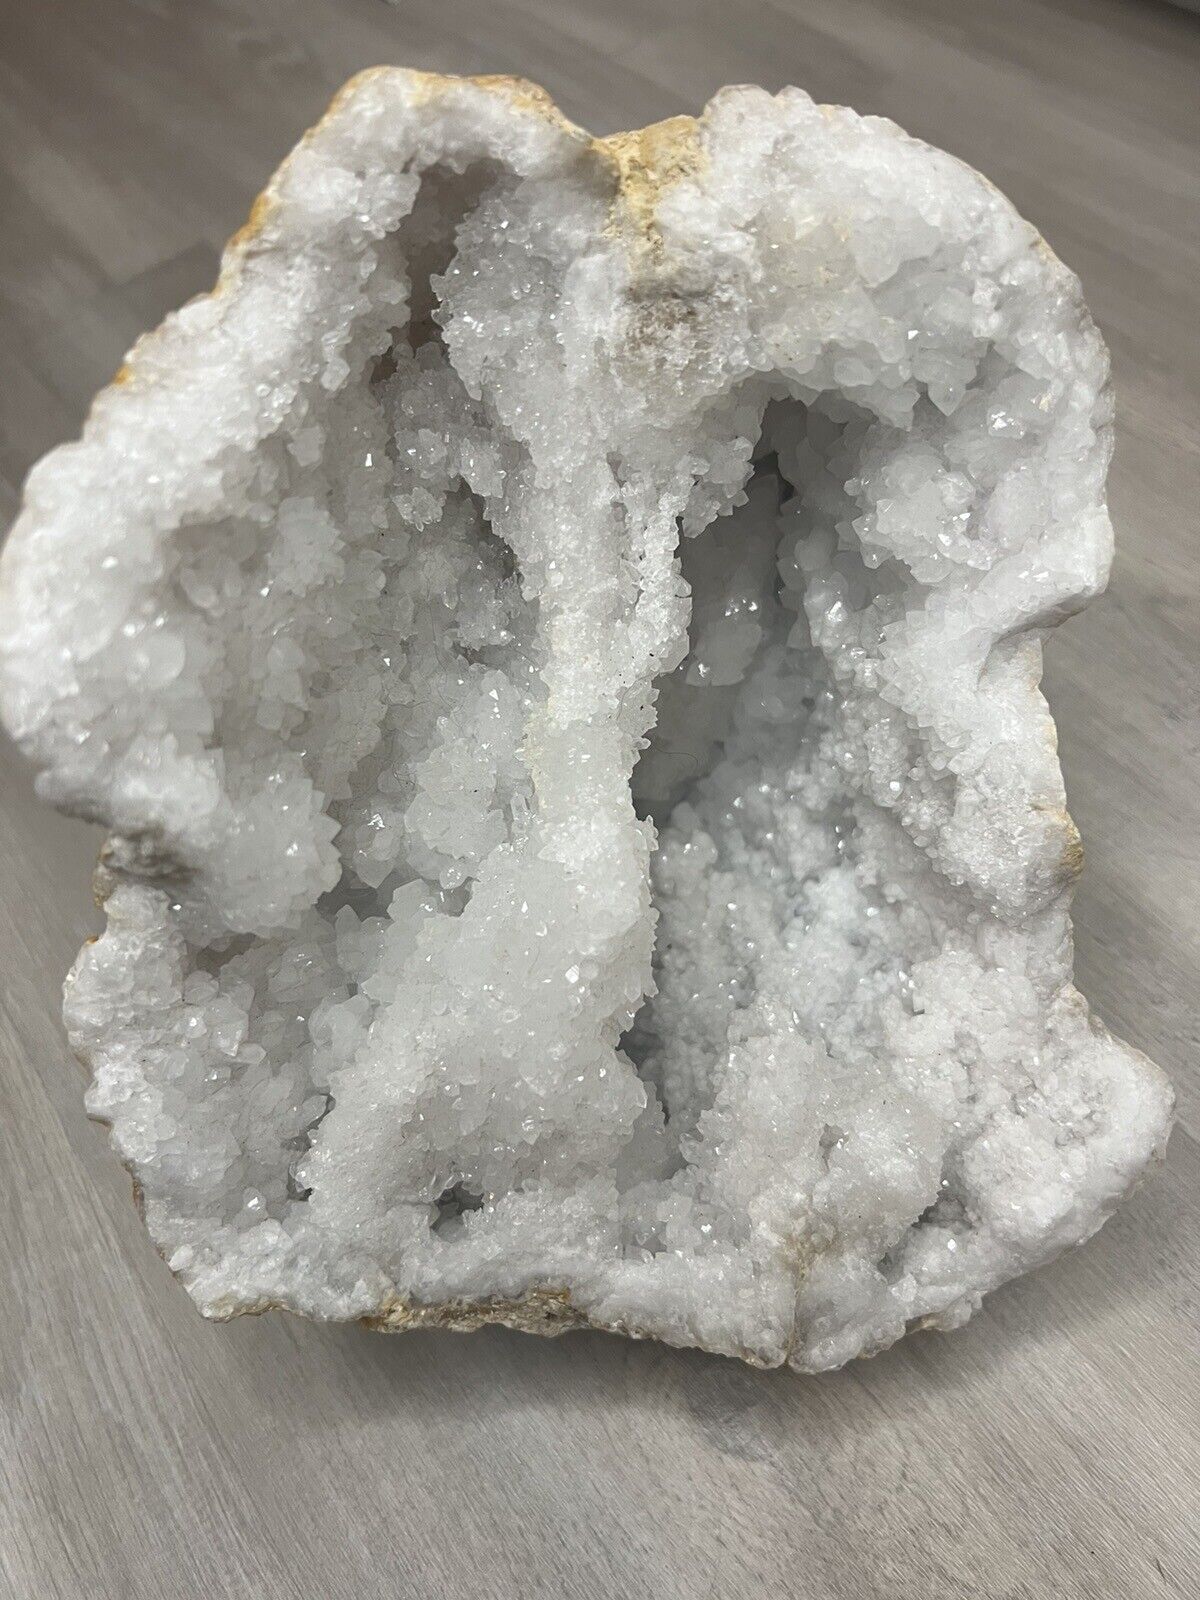 7 Lb 10.4 Oz.  Natural Quartz Geode Crystal Cluster Sparkly White Clear Healing